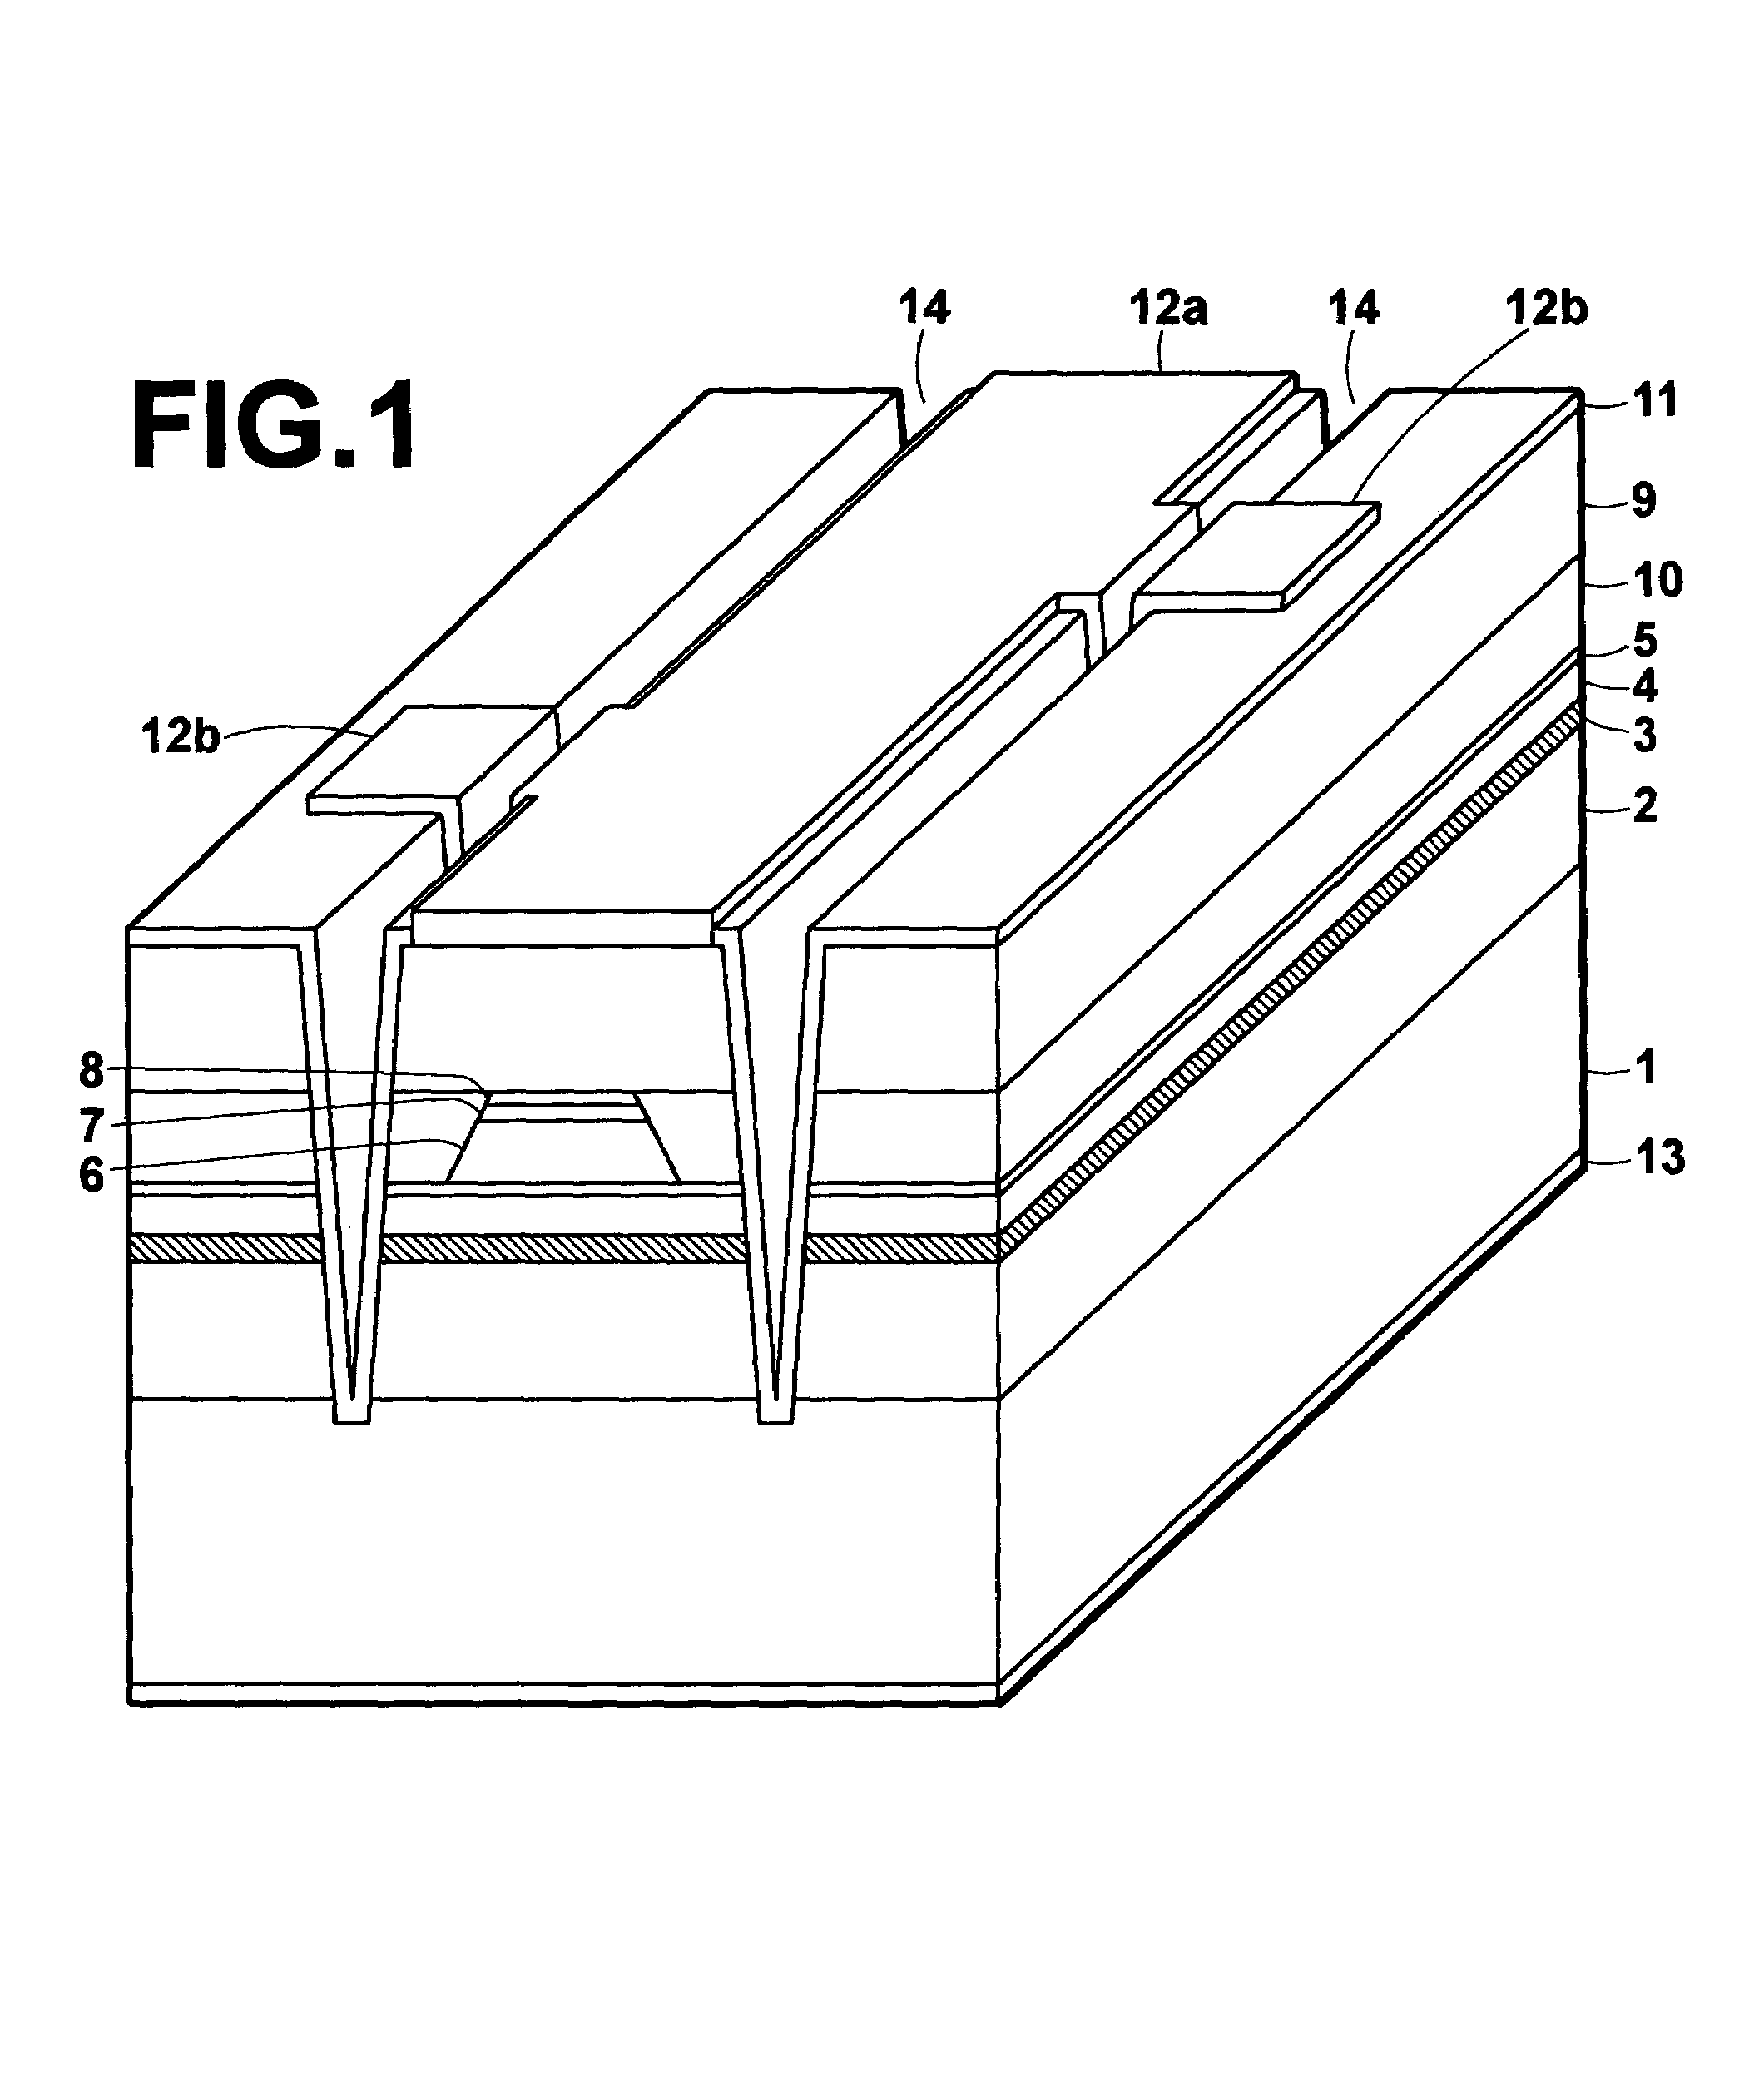 Semiconductor laser element having tensile-strained quantum-well active layer